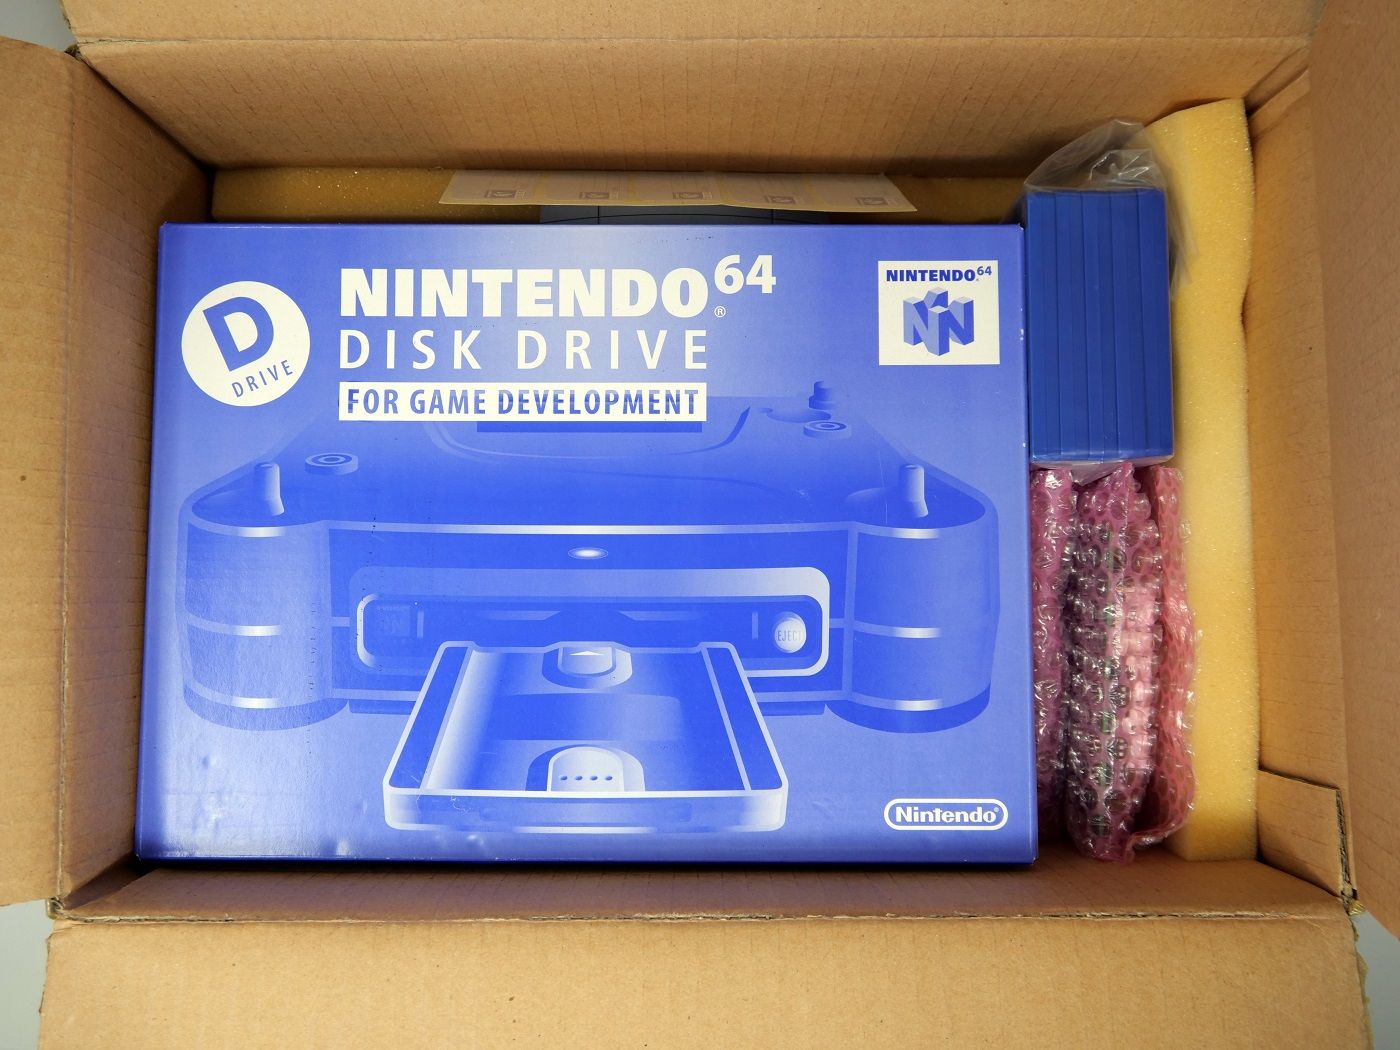 Open box showing a rare Nintendo 64 development kit inside which is in mint condition.